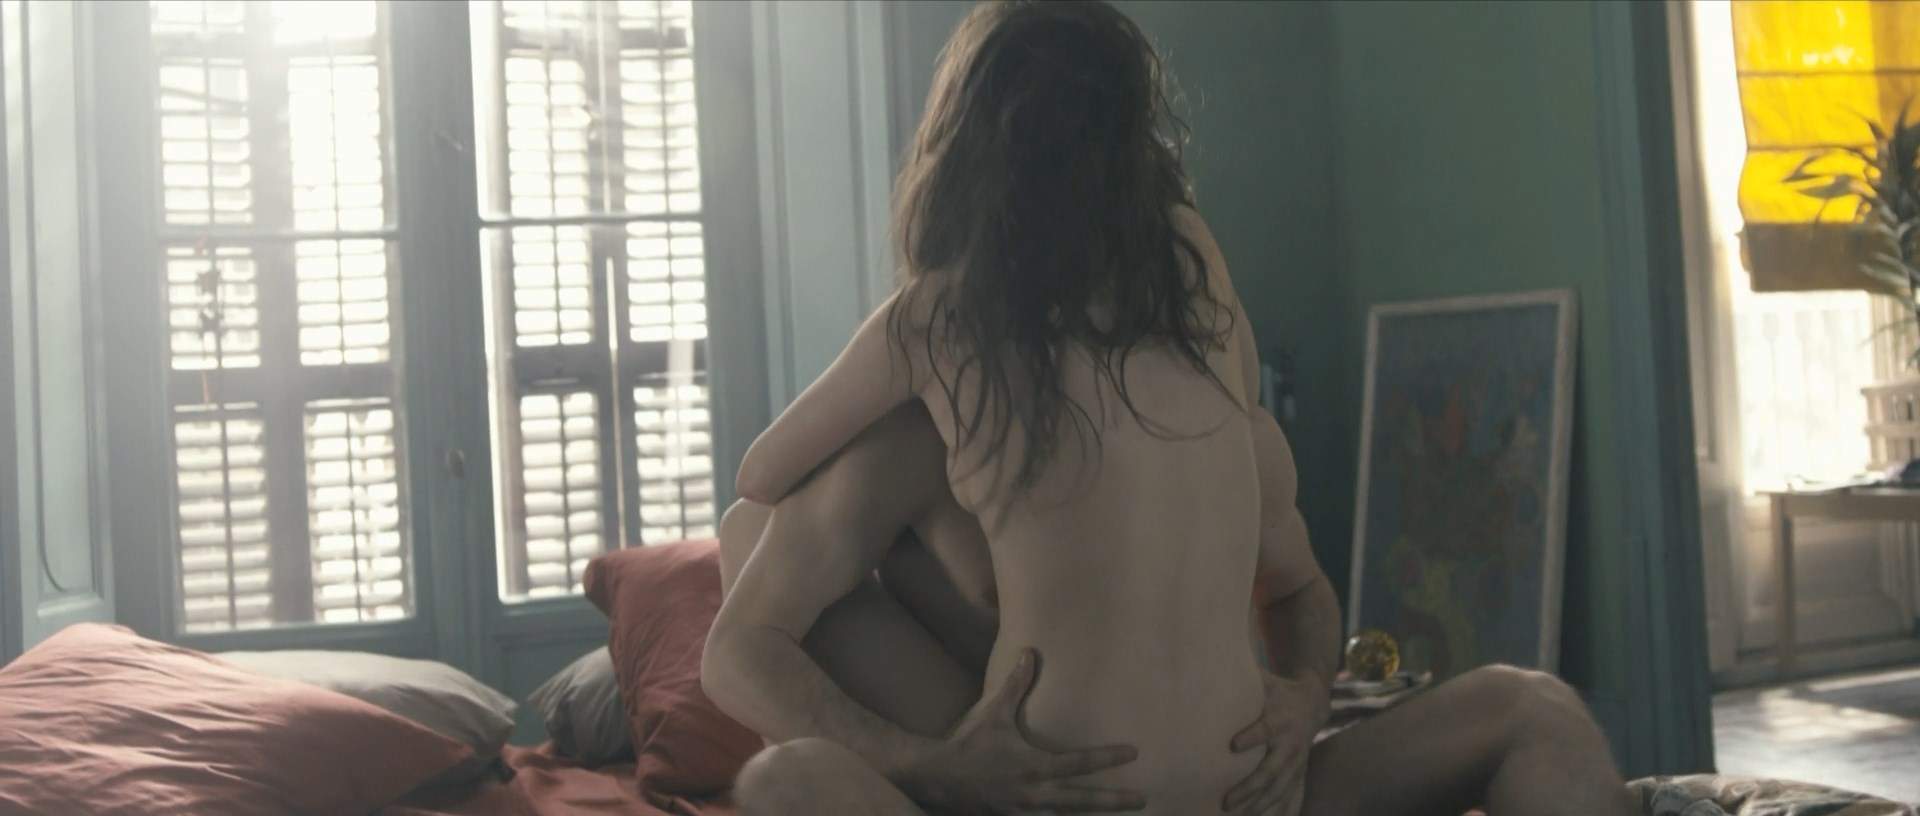 Astrid Berges-Frisbey Nude. 